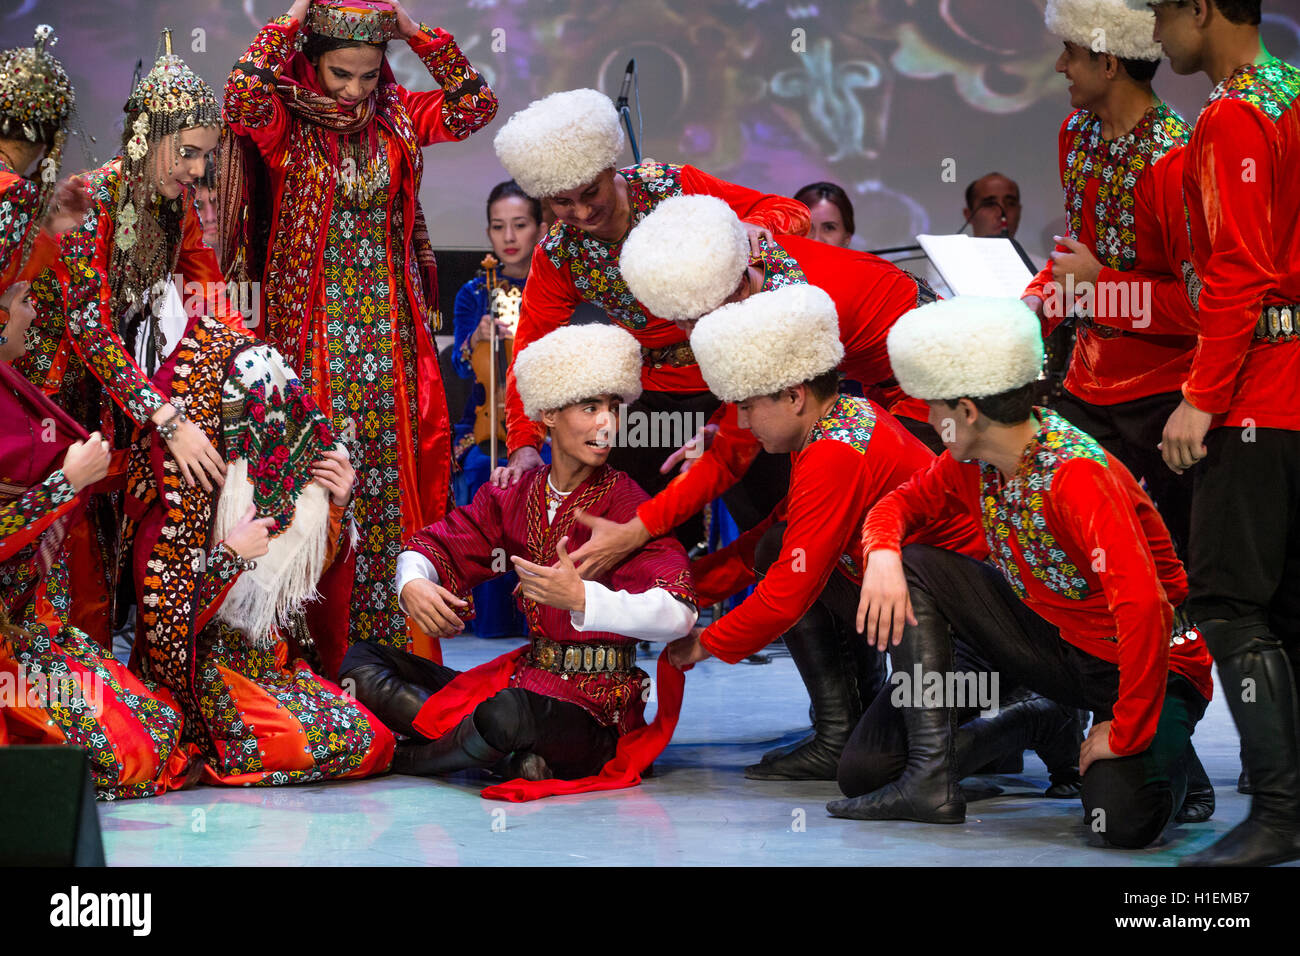 Dance group 'Lachin' shows the traditional wedding ceremony during the Days of Culture of Turkmenistan Republic in Moscow,Russia Stock Photo